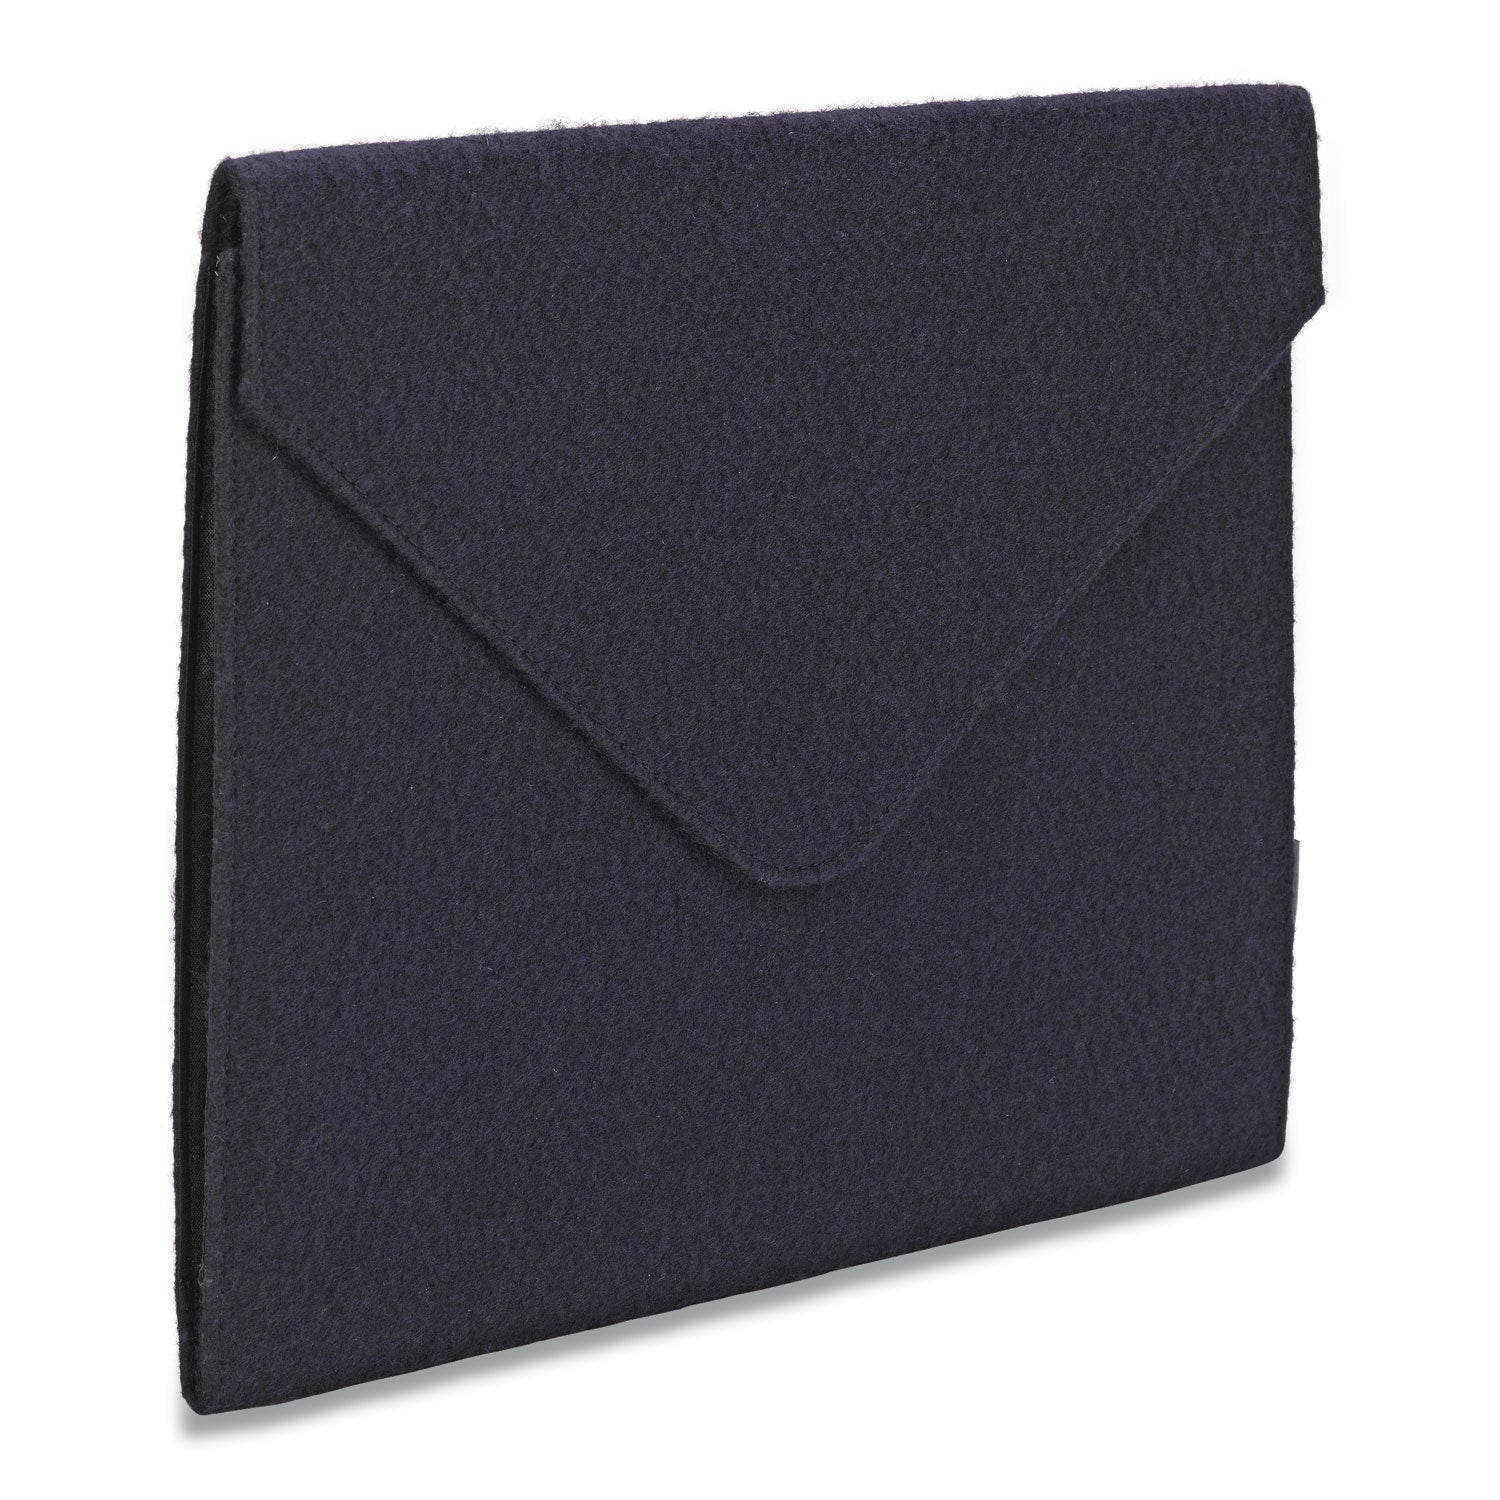 soft-touch-cloth-expanding-files-2-expansion-1-section-snap-closure-letter-size-dark-blue_smd70922 - 1